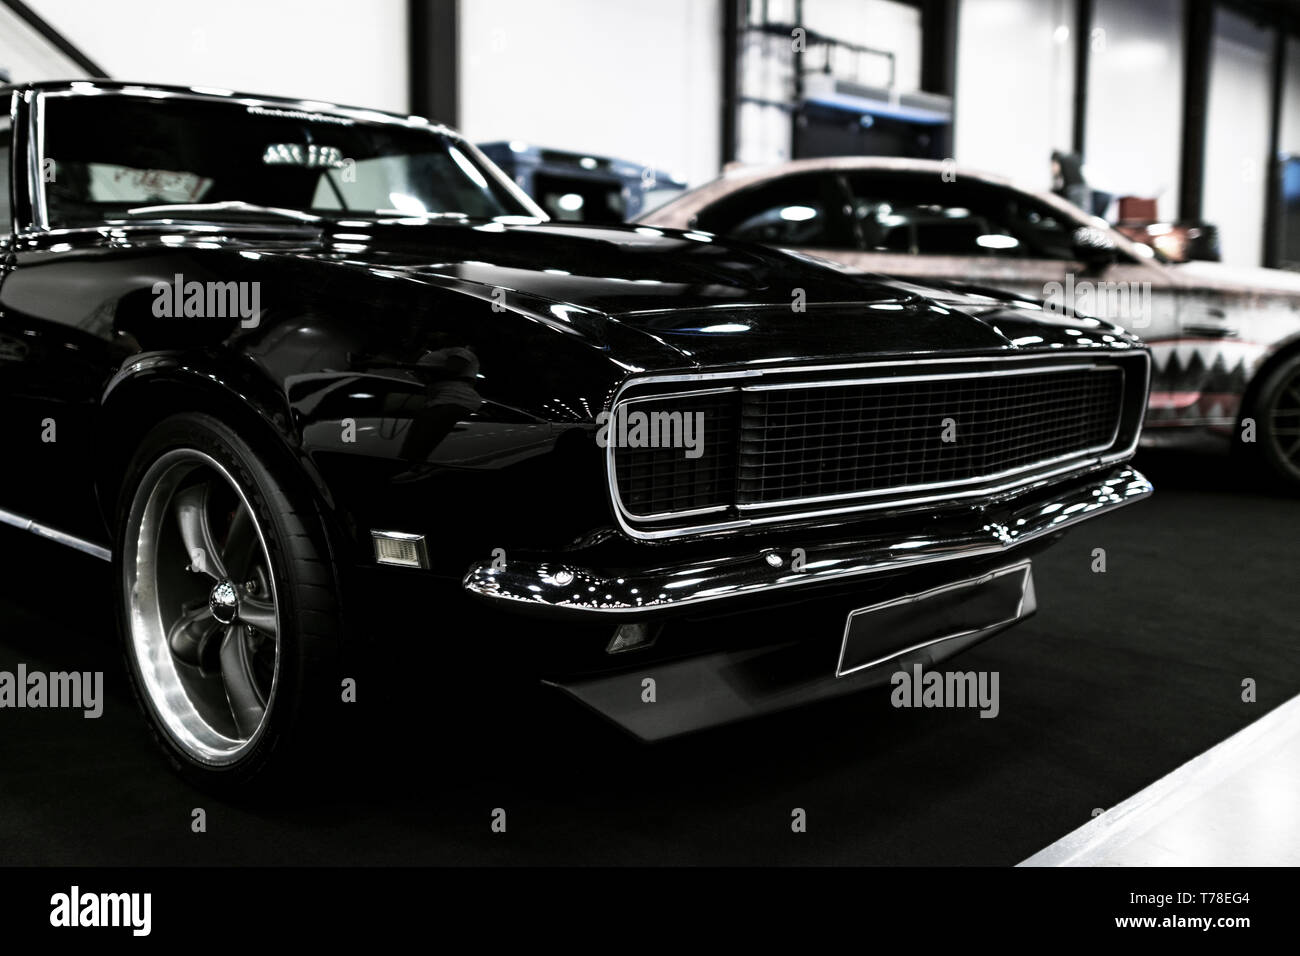 Sankt-Petersburg, Russia July 21 2017: Front view of a Black Dodge Charger RT muscle car.  Car exterior details. Photo Taken at Royal Auto Show July  Stock Photo